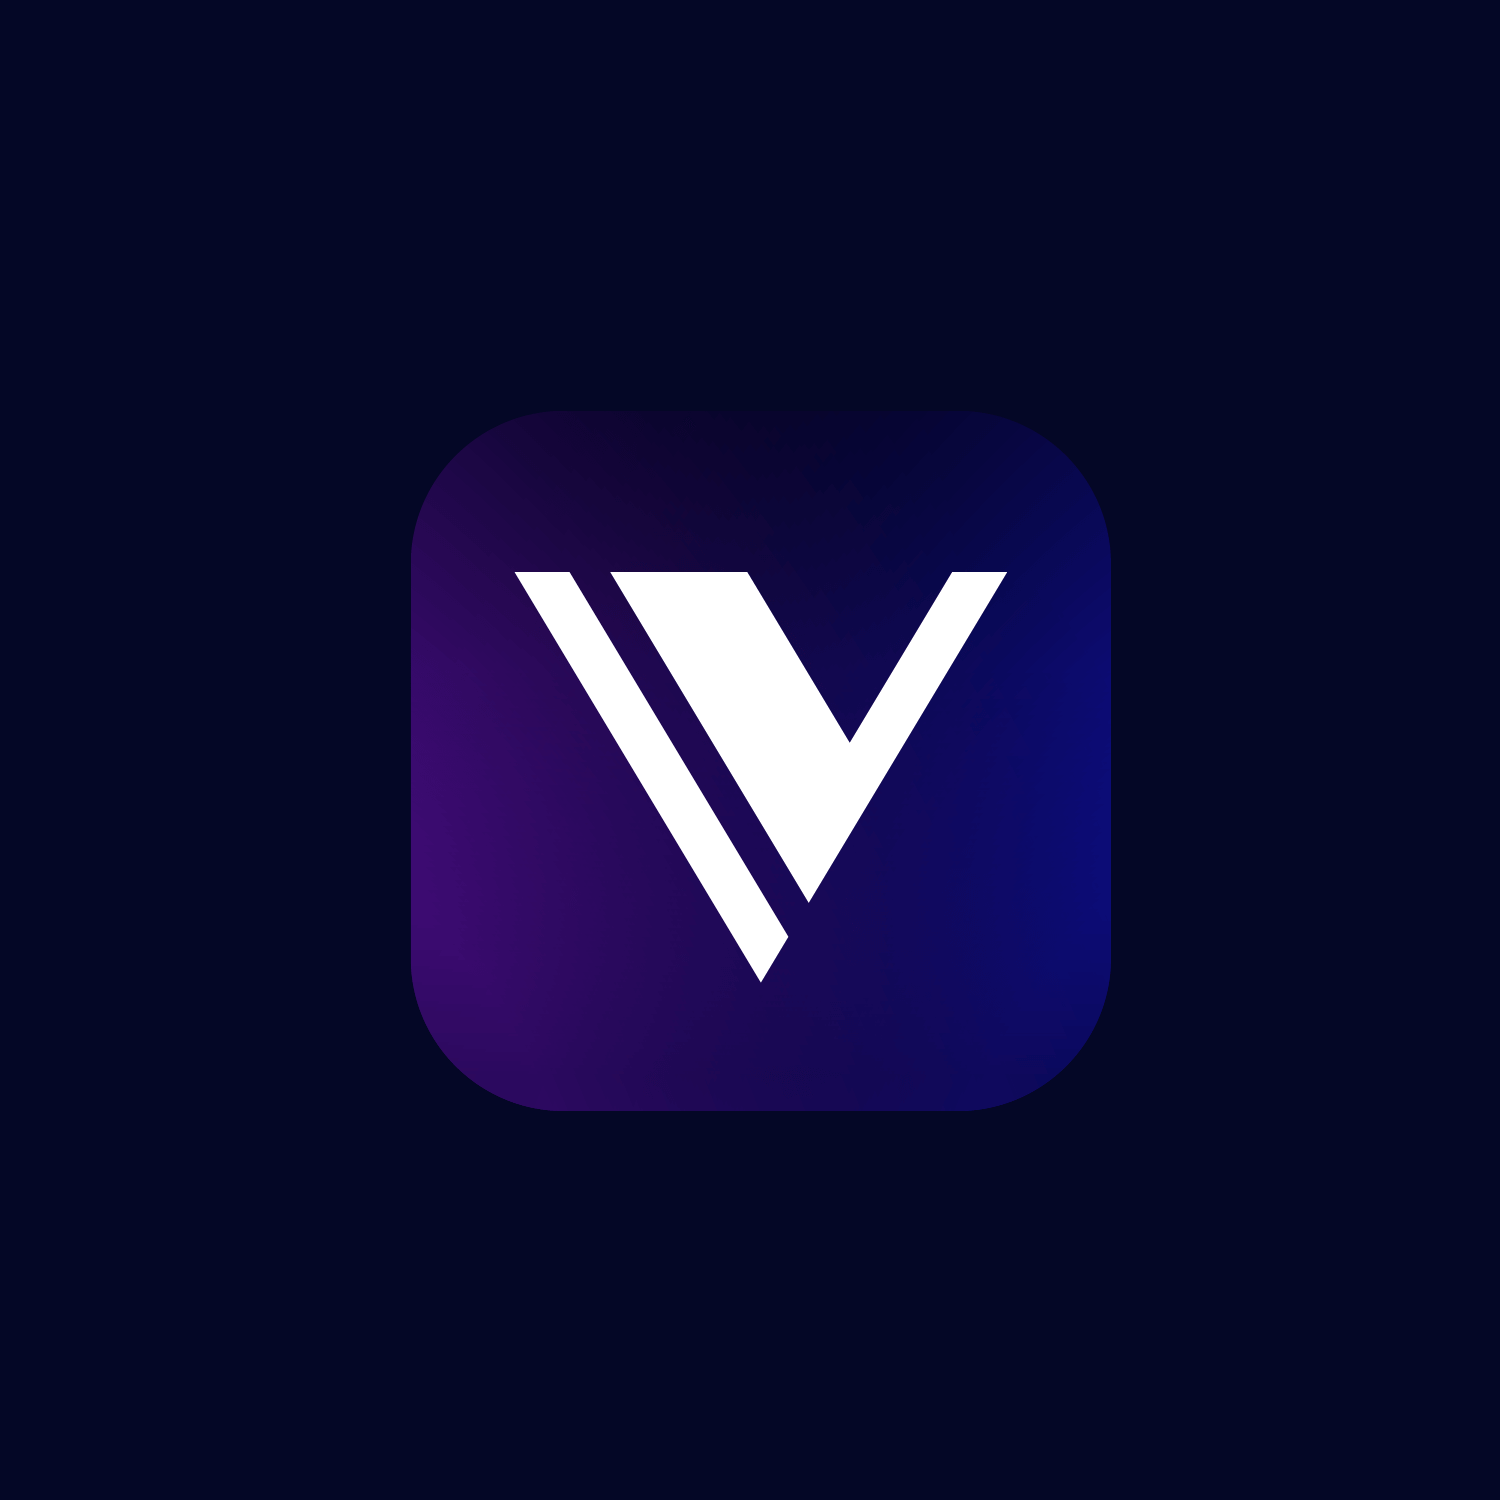 White V monogram on a deep purple and blue gradient app icon with a navy background